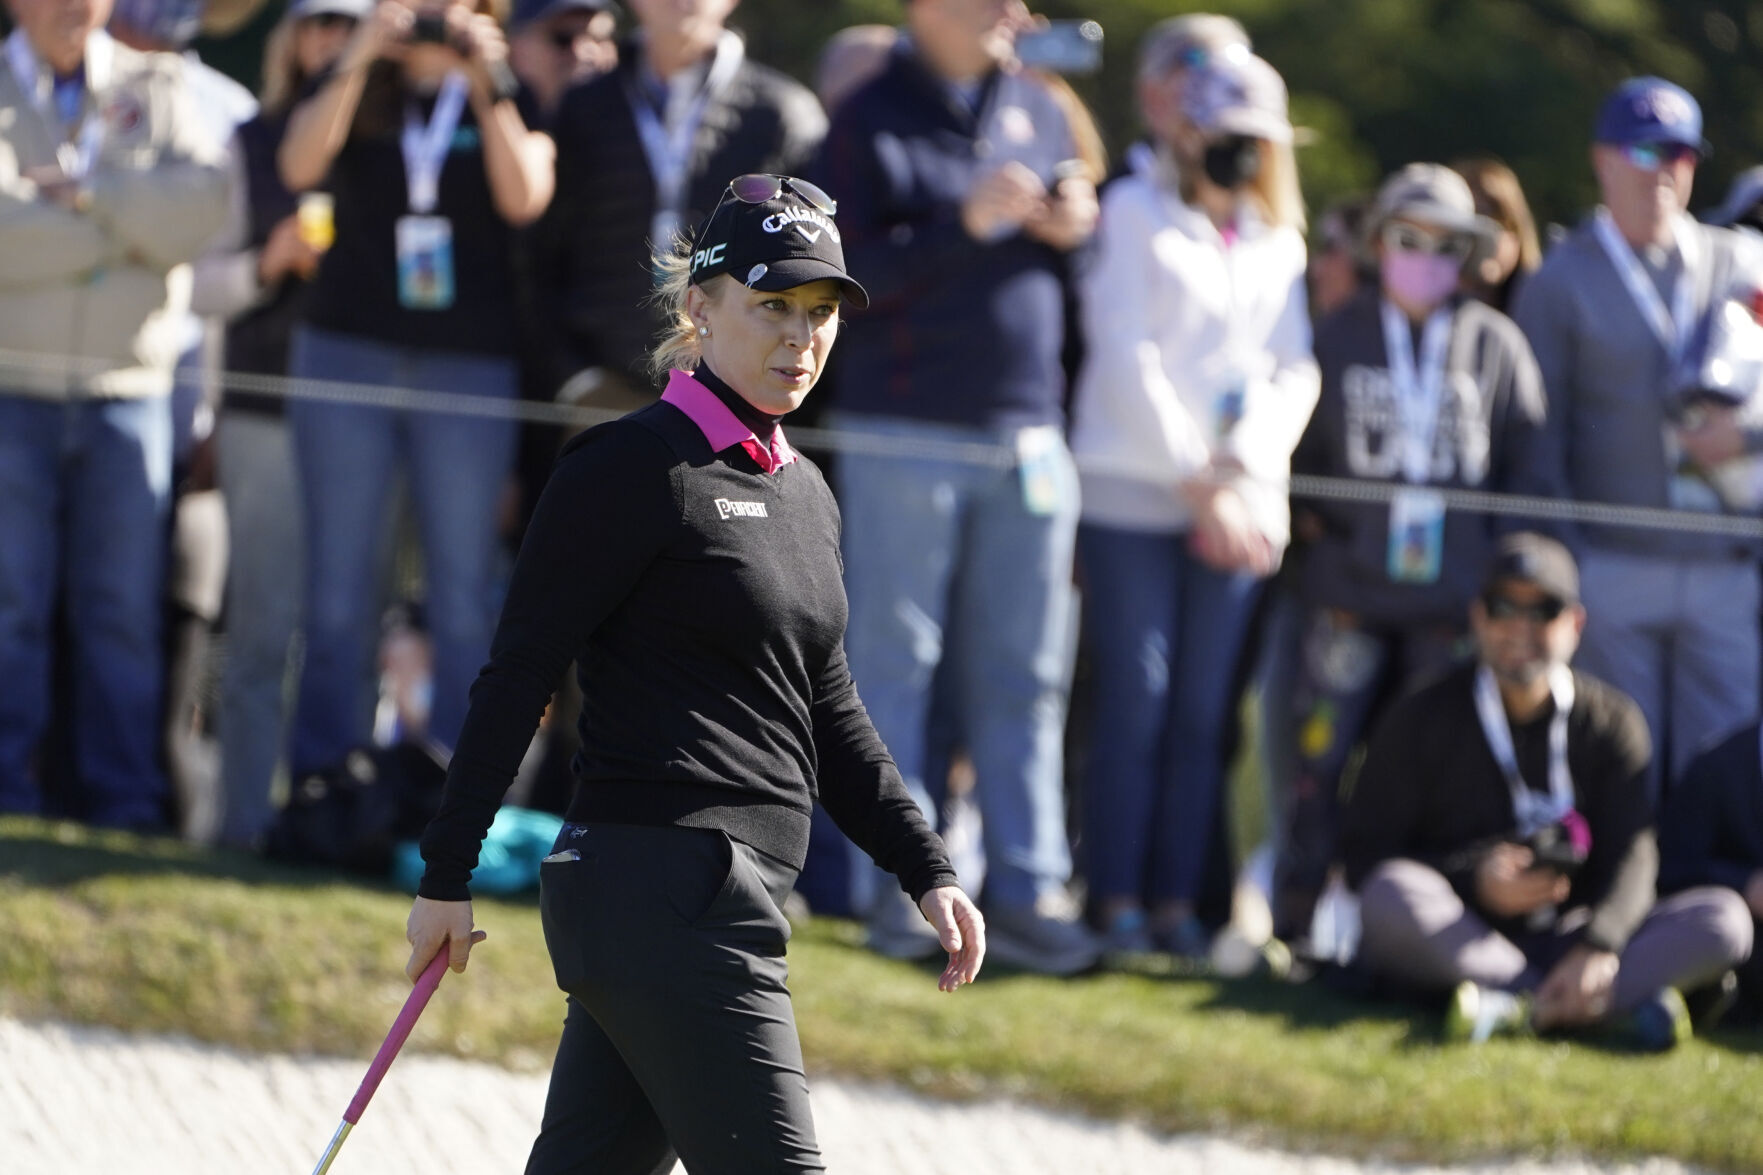 Morgan Pressel makes transition from 18th green to 18th tower for pic